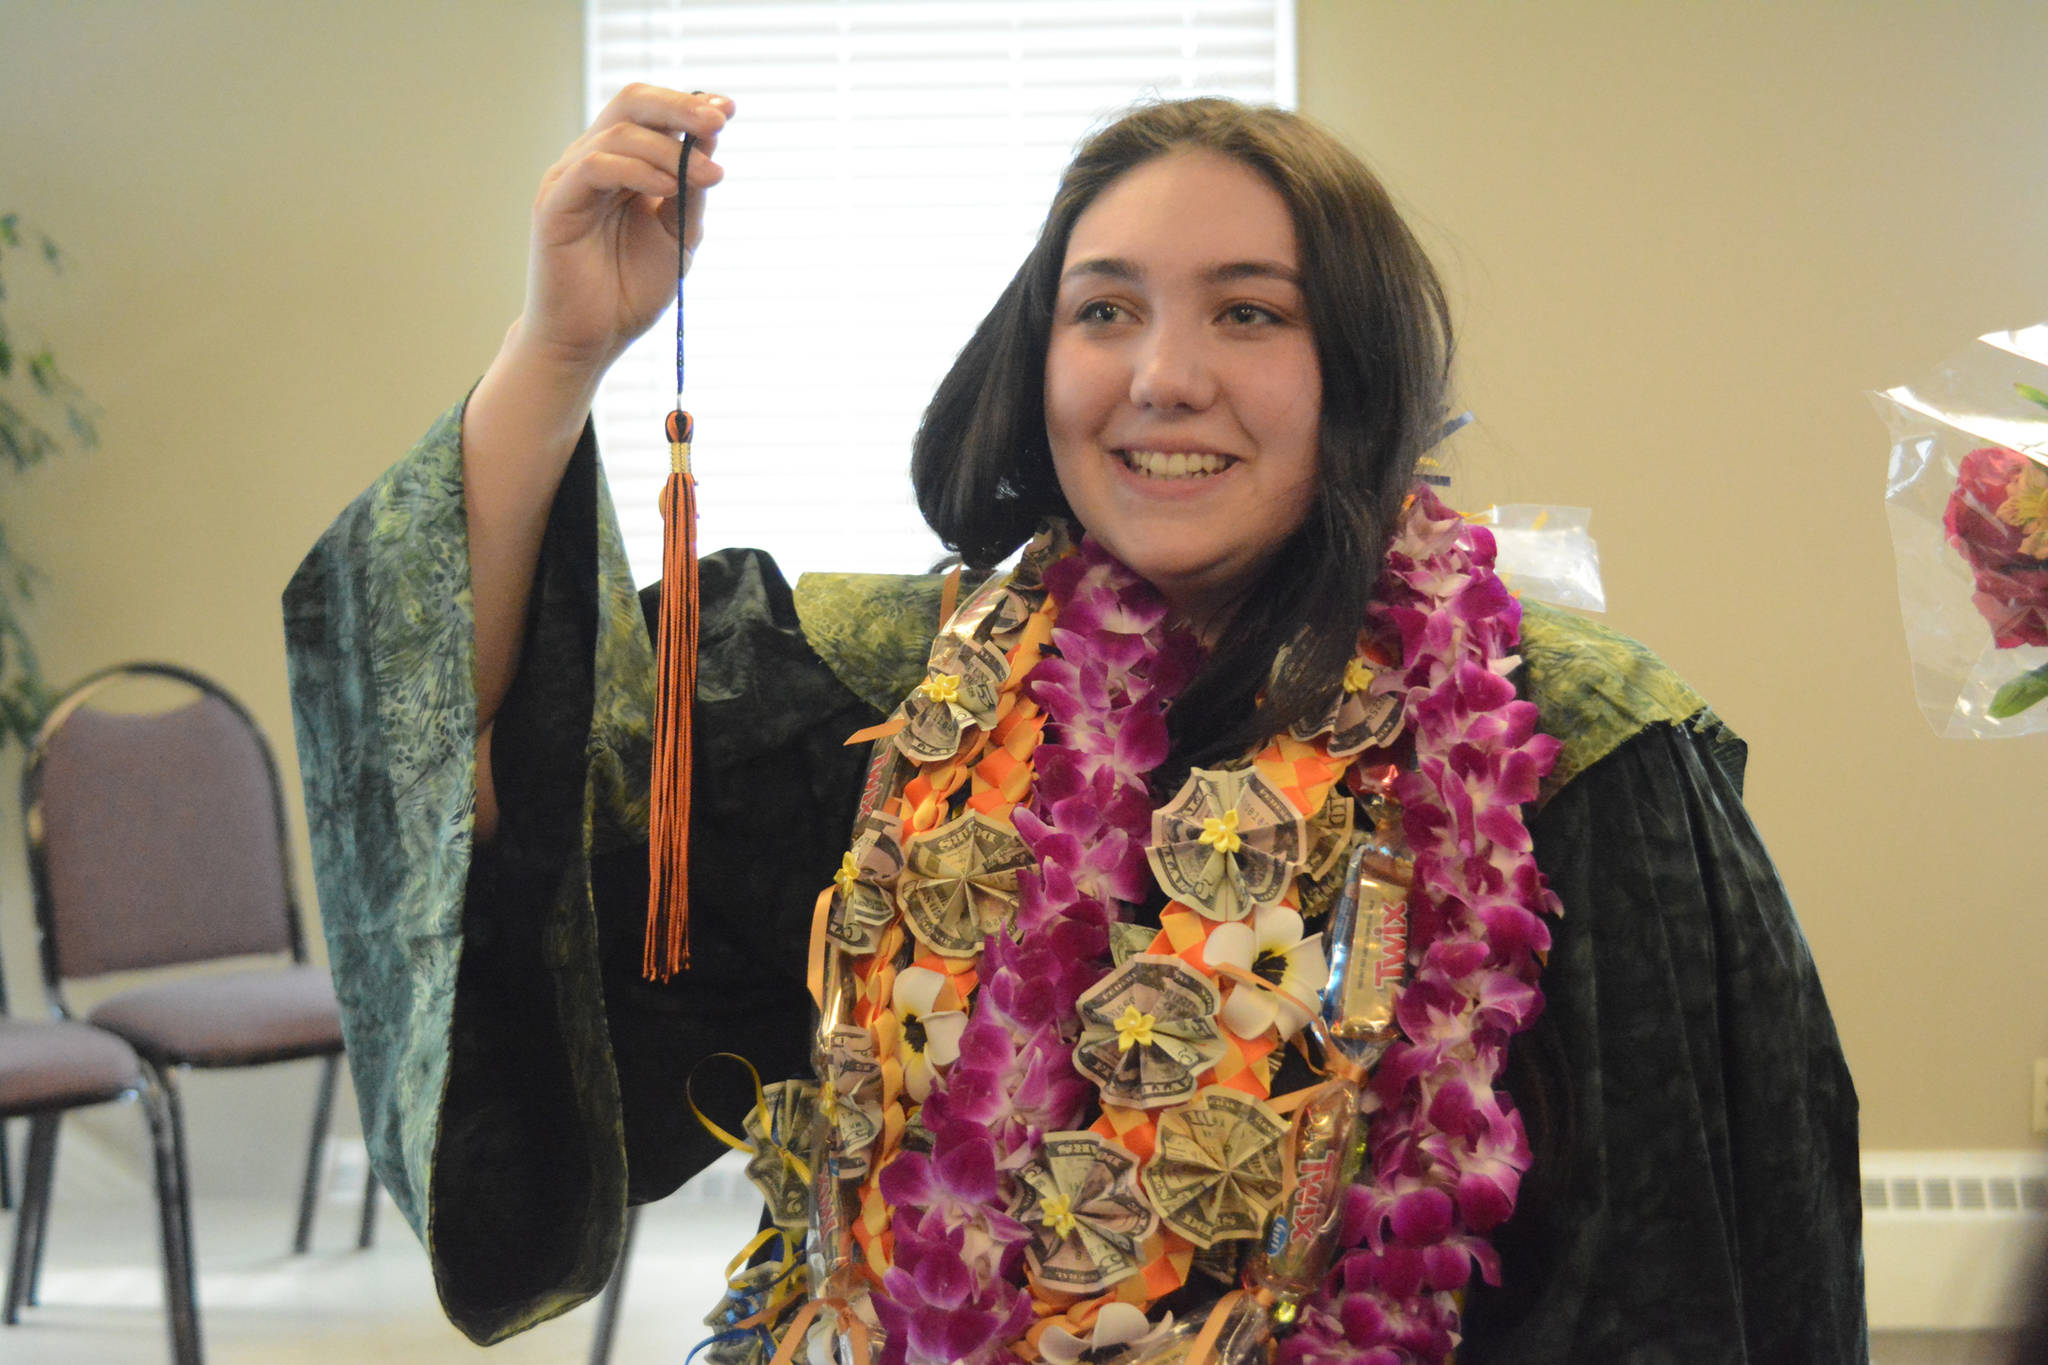 Hailee Fisher poses for a photo after graduation ceremonies on Wednesday, May 22, 2019, at Land’s End Resort in Homer, Alaska. Fisher made her own robe with help from Flex counselor Ingrid Harrald. (Photo by Michael Armstrong/Homer News)